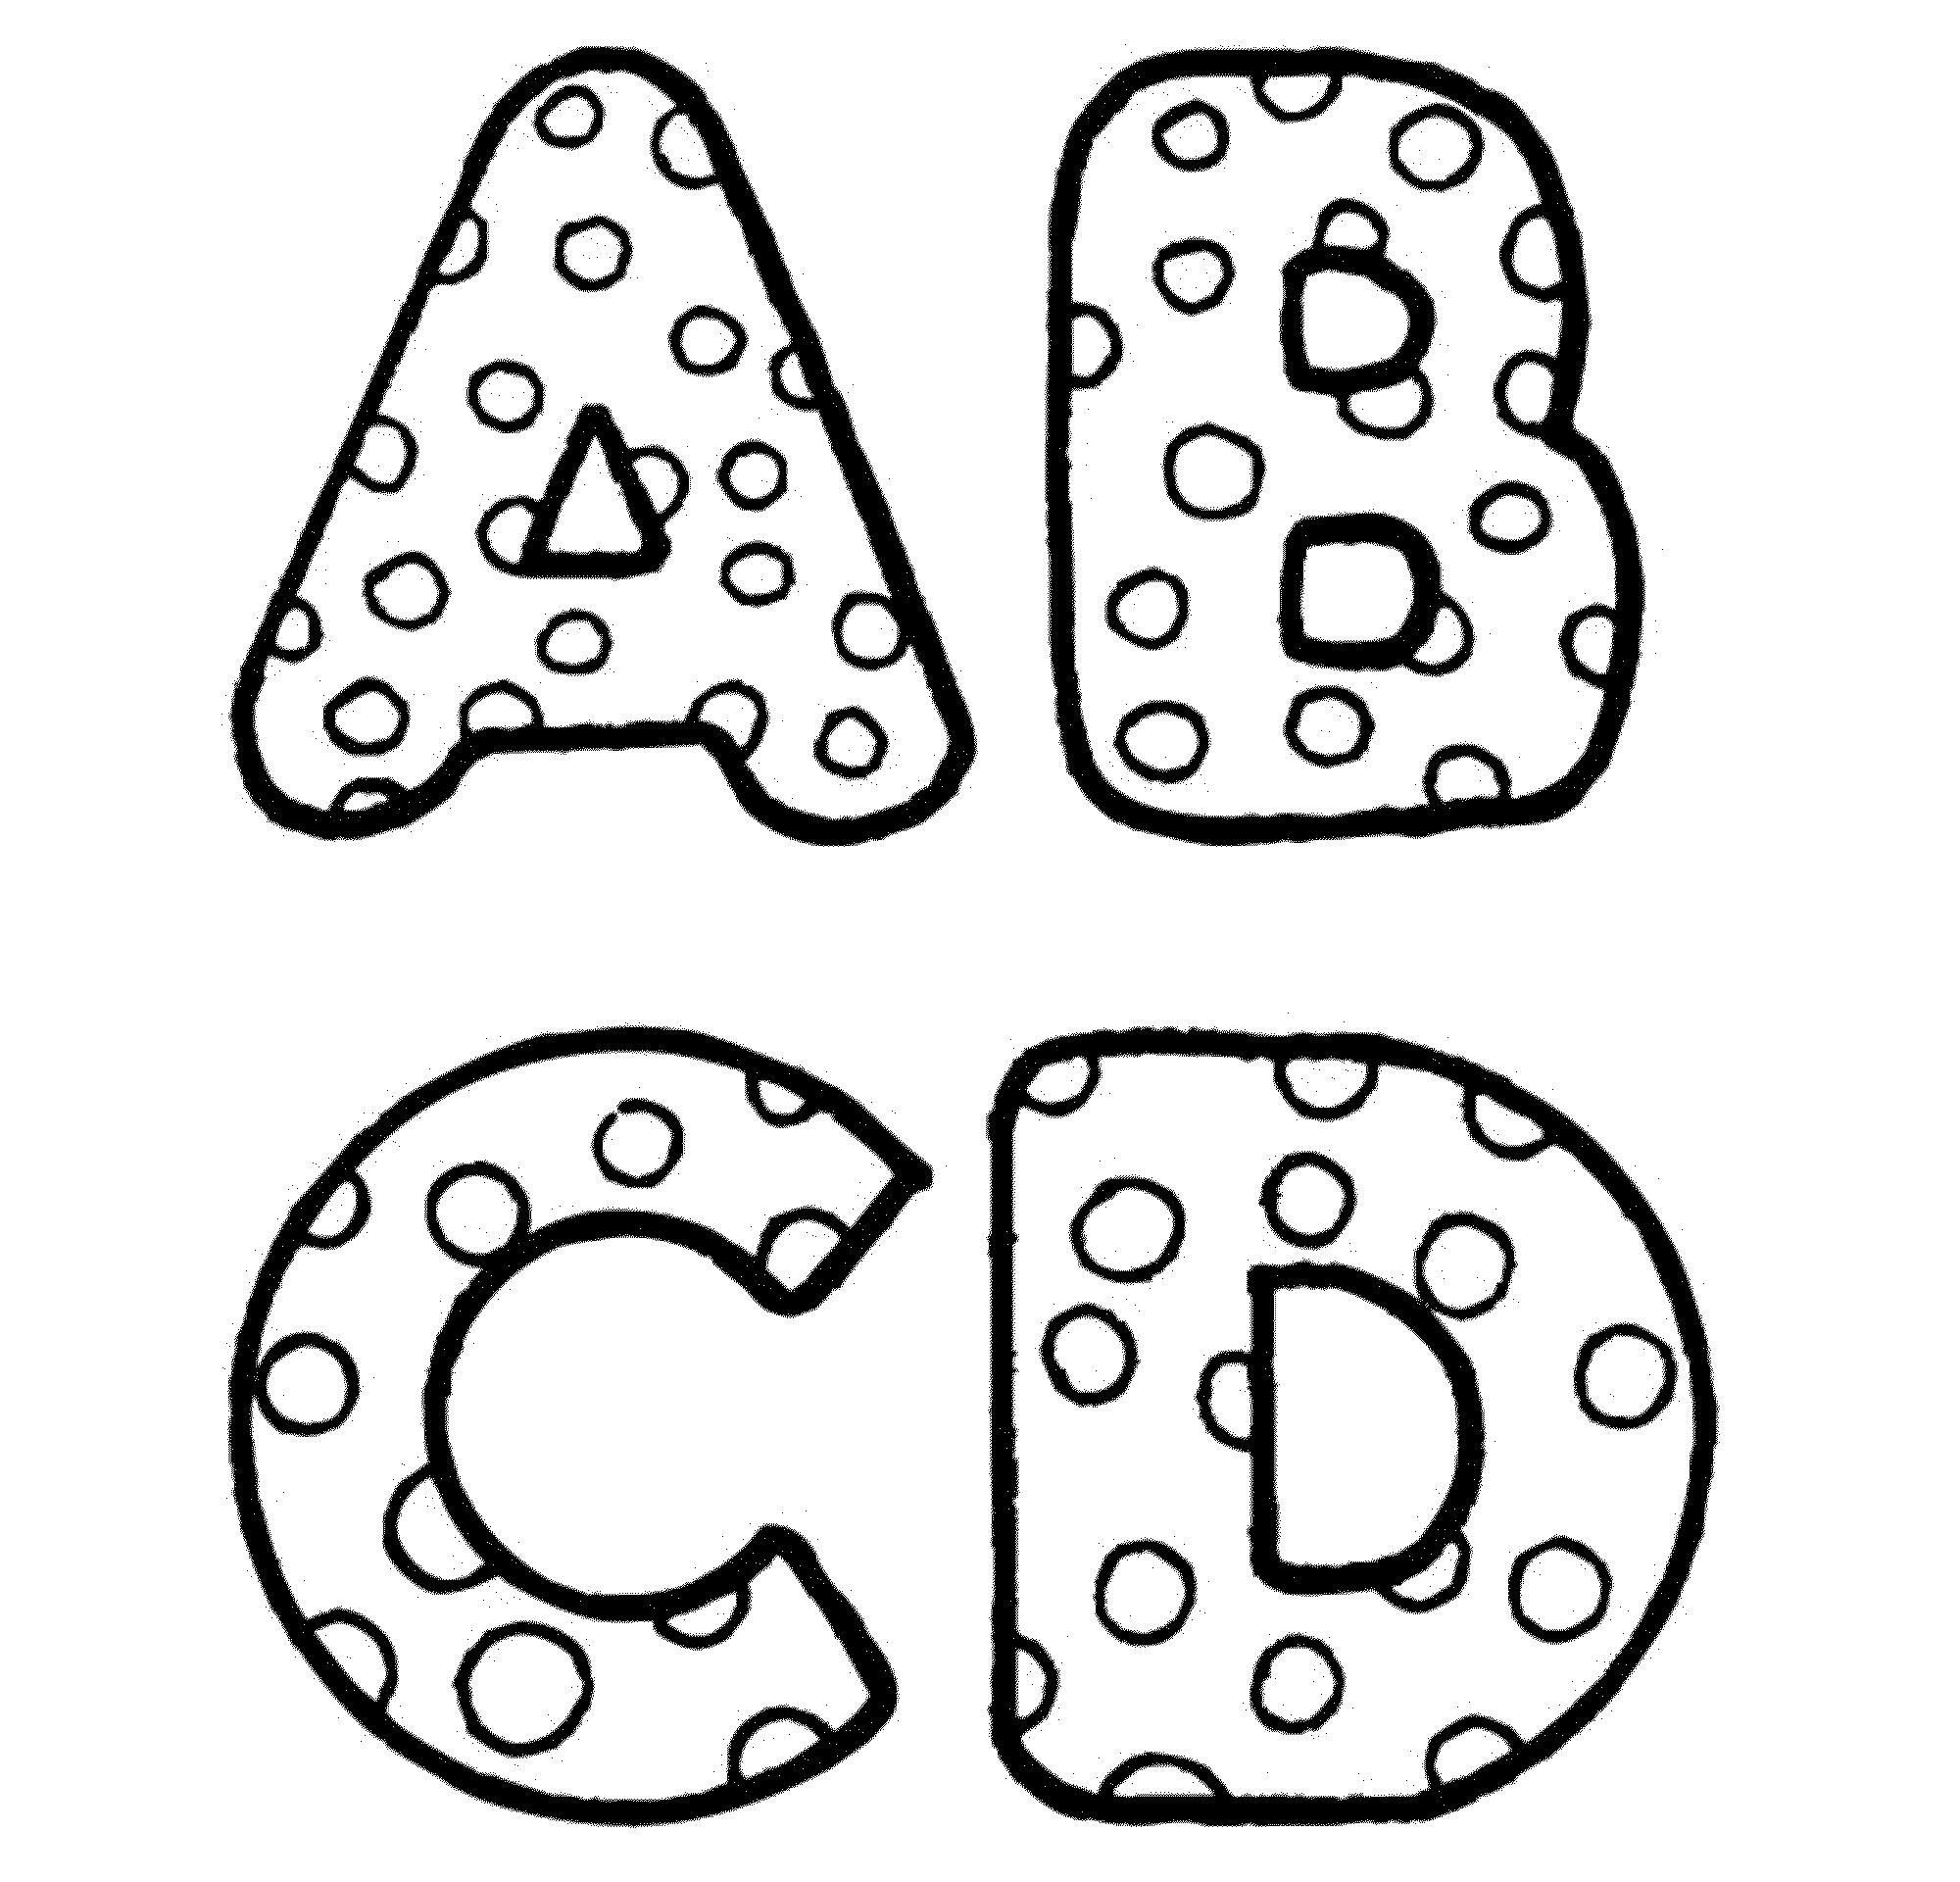 Abc Blocks Coloring Pages at GetColorings.com | Free ...